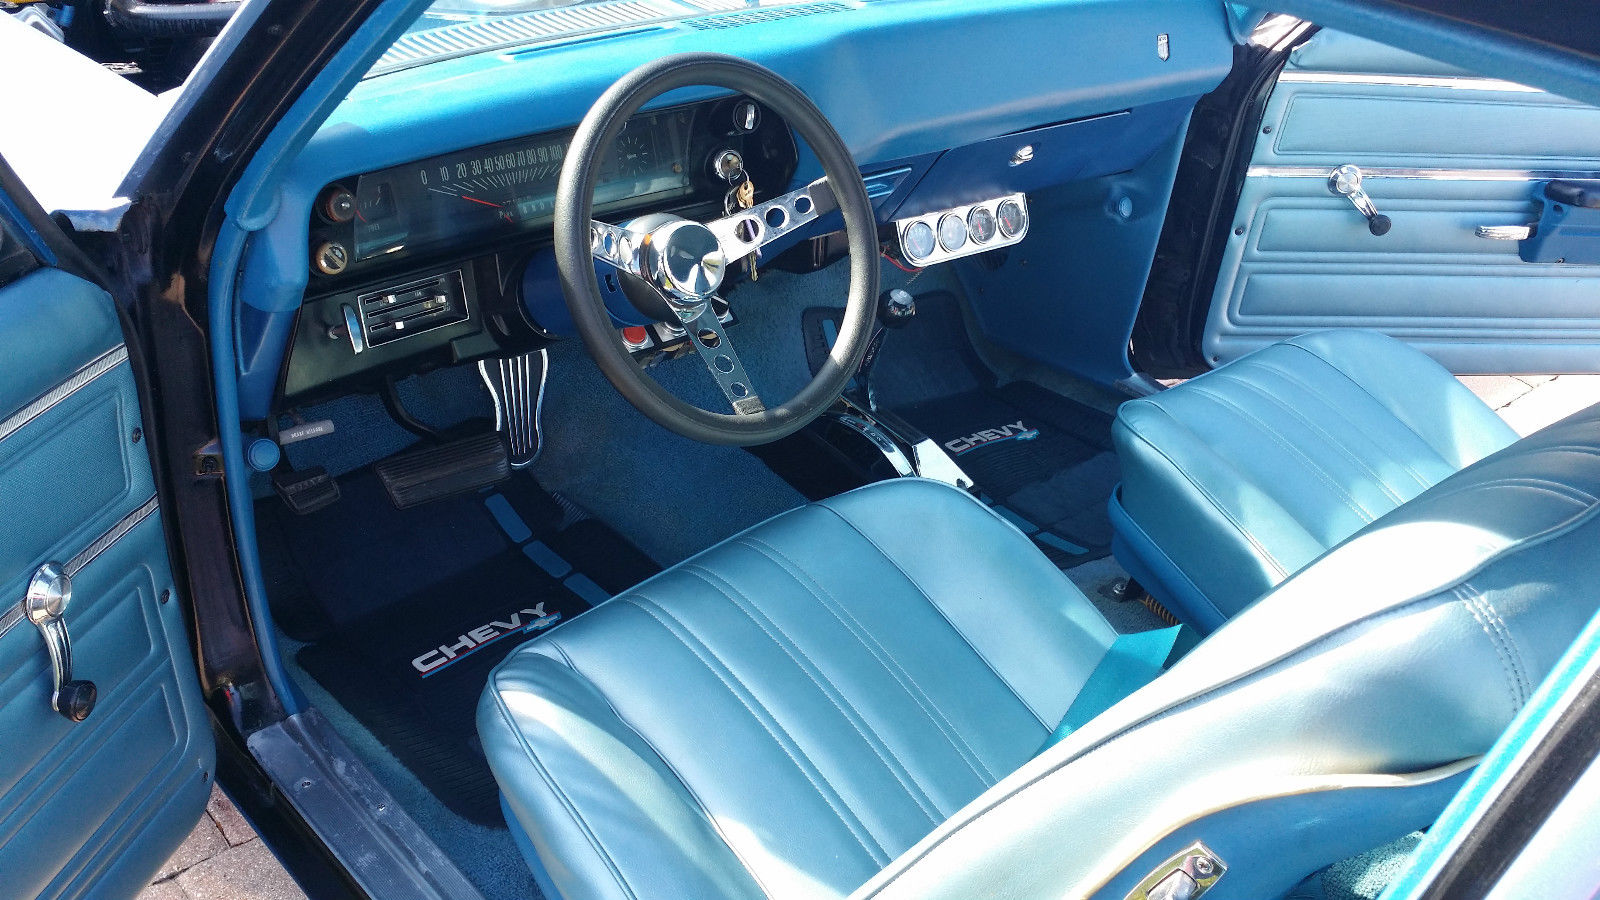 1968 Chevy Ii Nova Shades Of Blue All Tricked Out For Sale